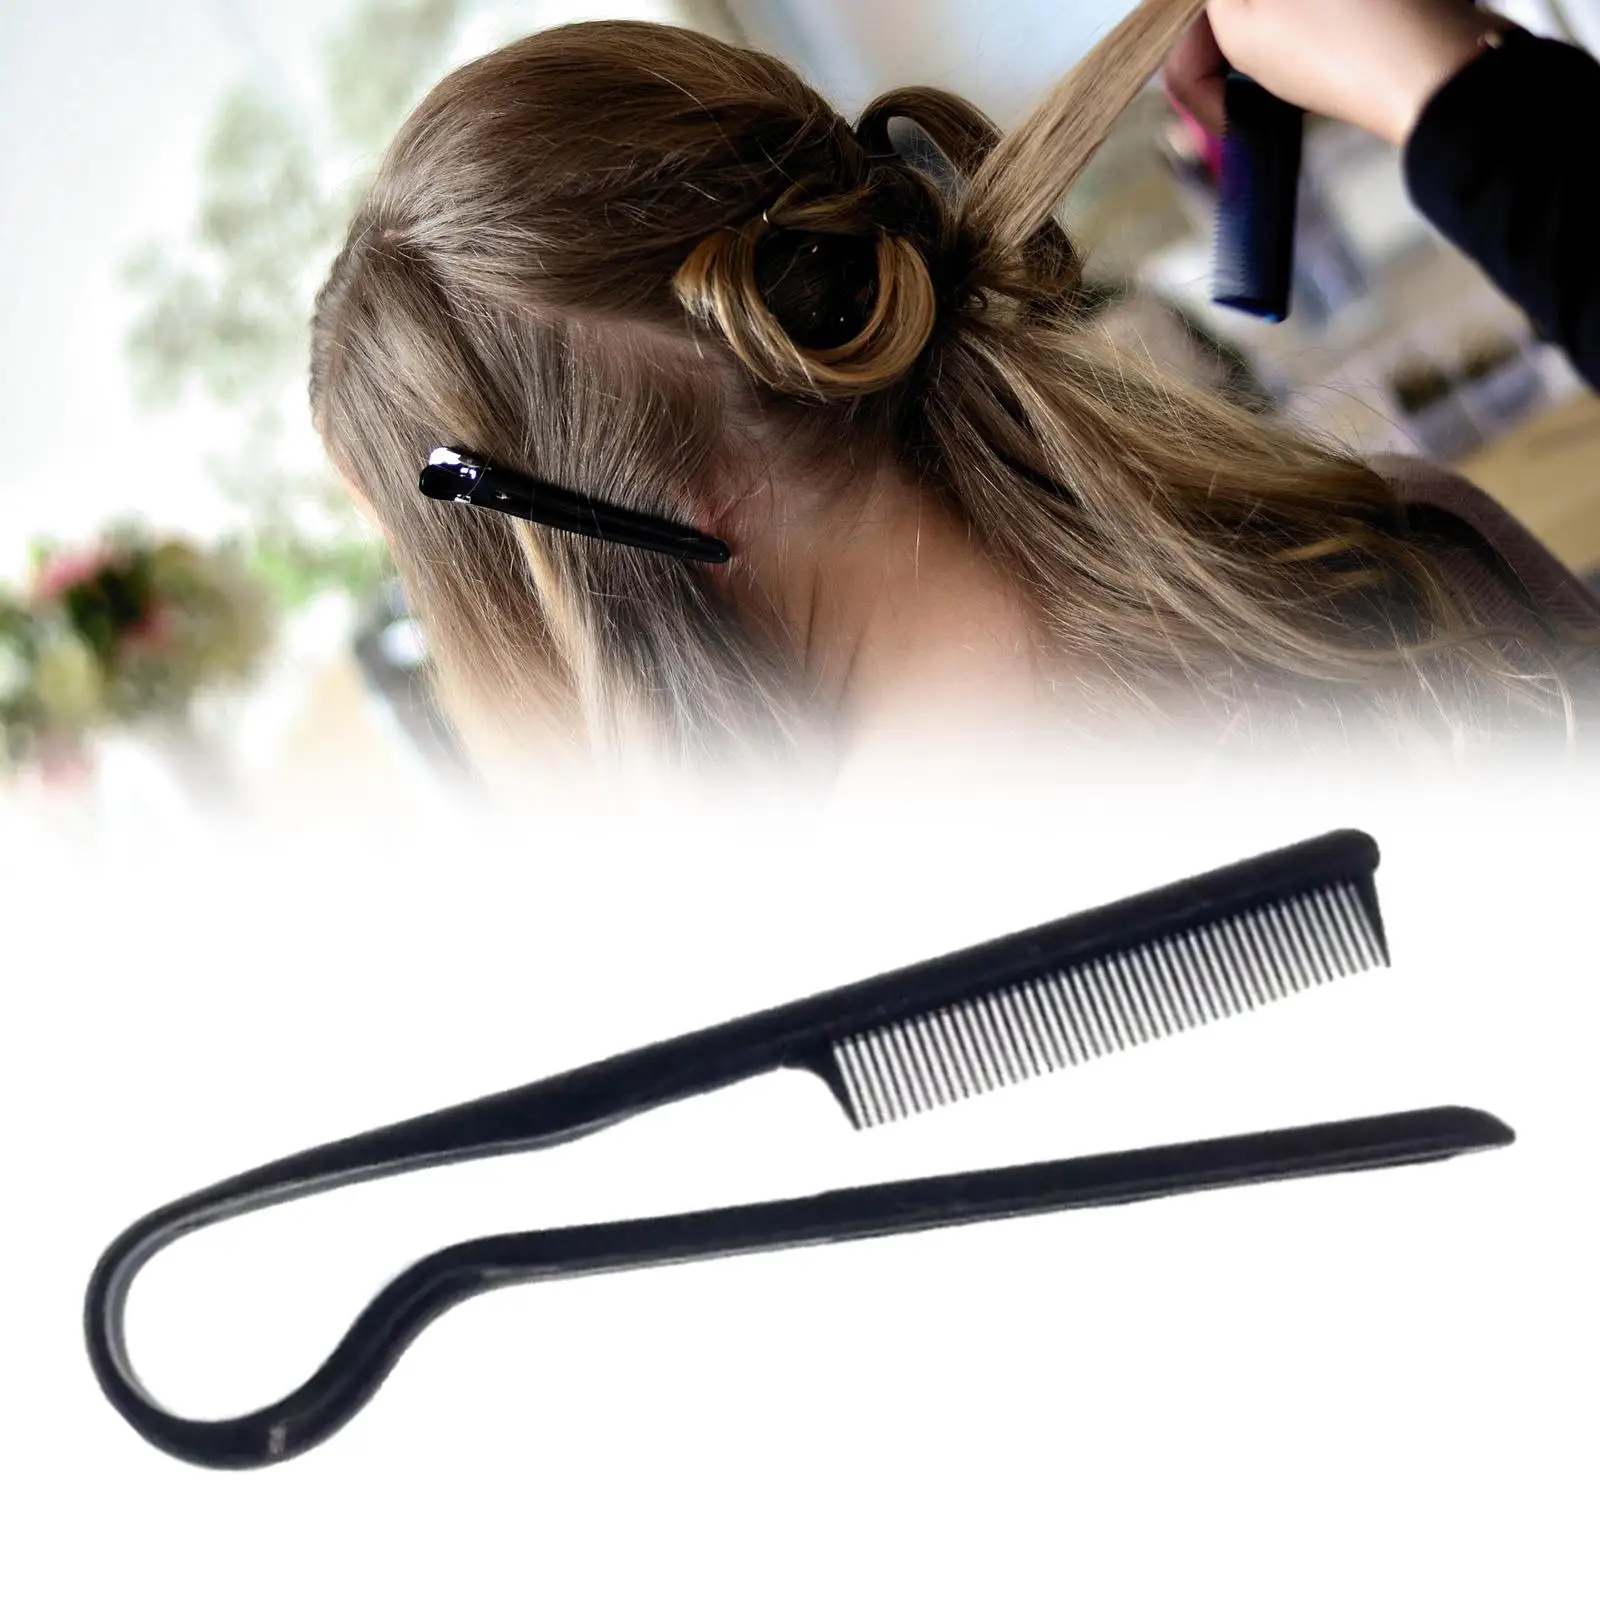 Hair Straightening Comb Firm Grip Flat Iron Comb for Home Hairdressing Salon